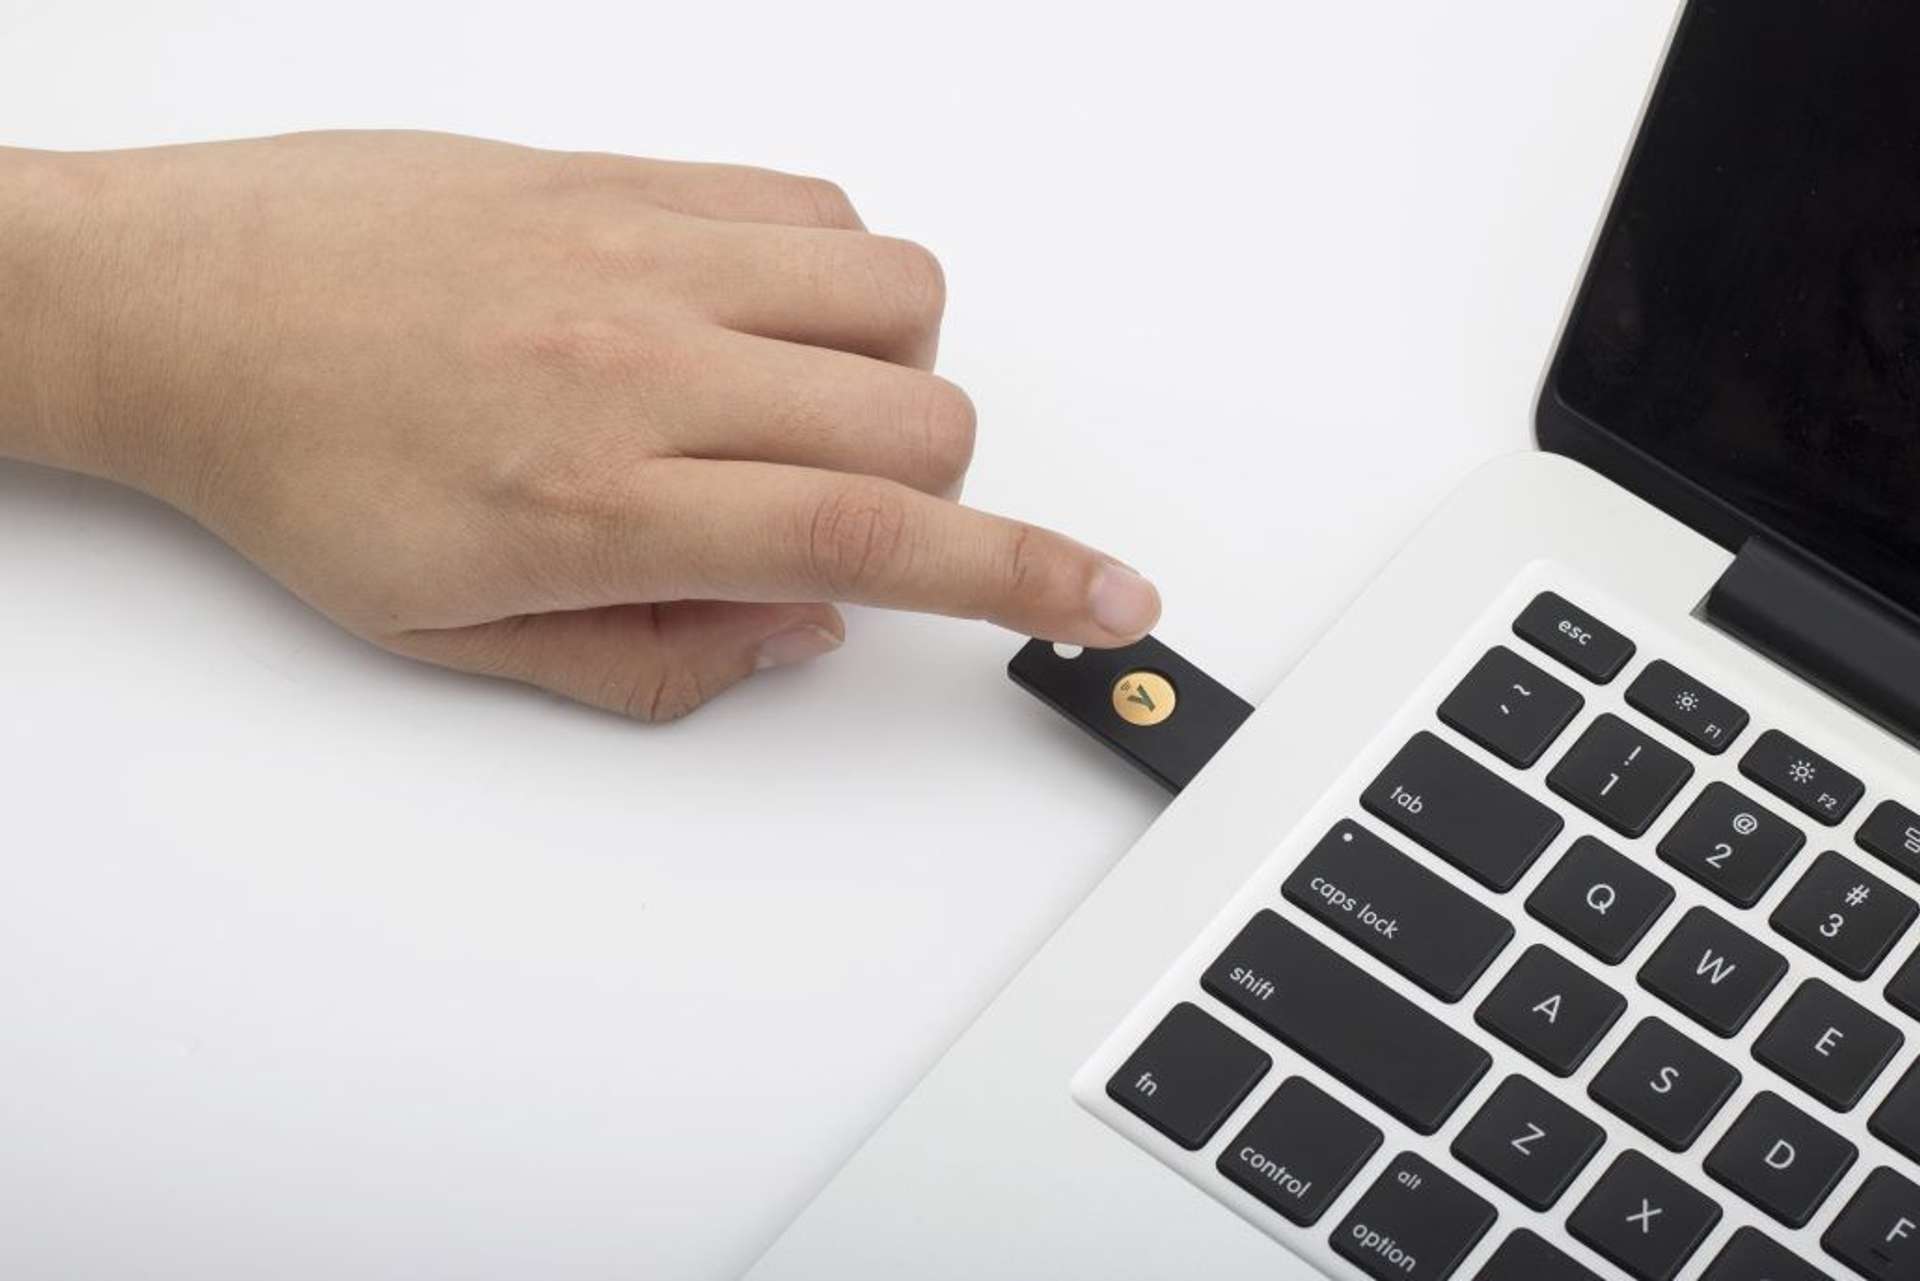 Yubico Yubikey 5 NFC in use in a laptop